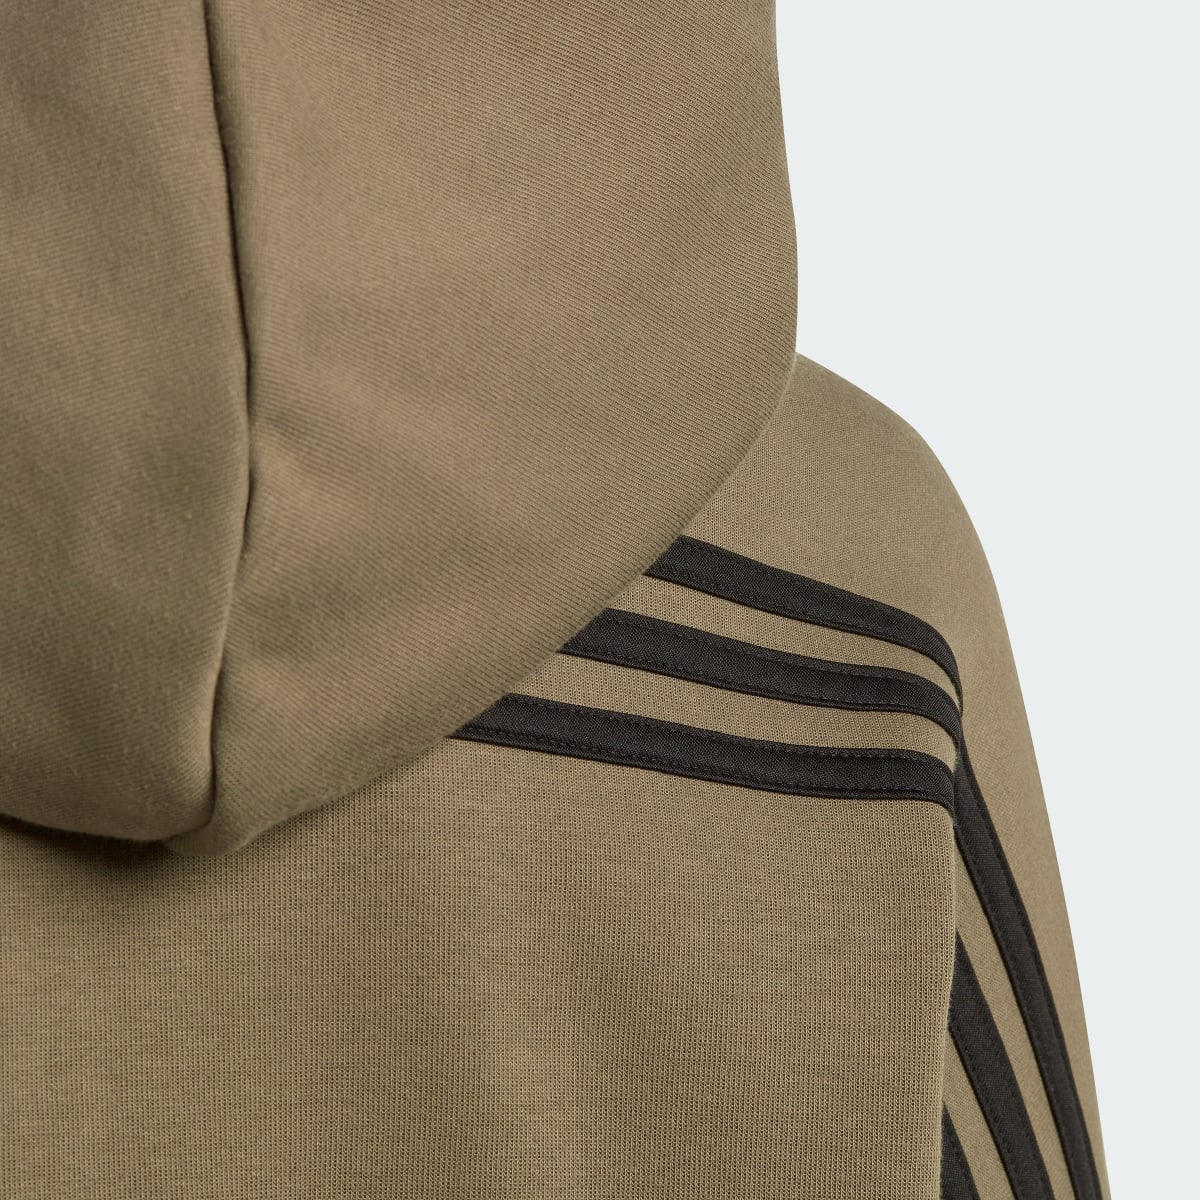 Adidas Future Icons 3-Stripes Full-Zip Hooded Track Top. 5